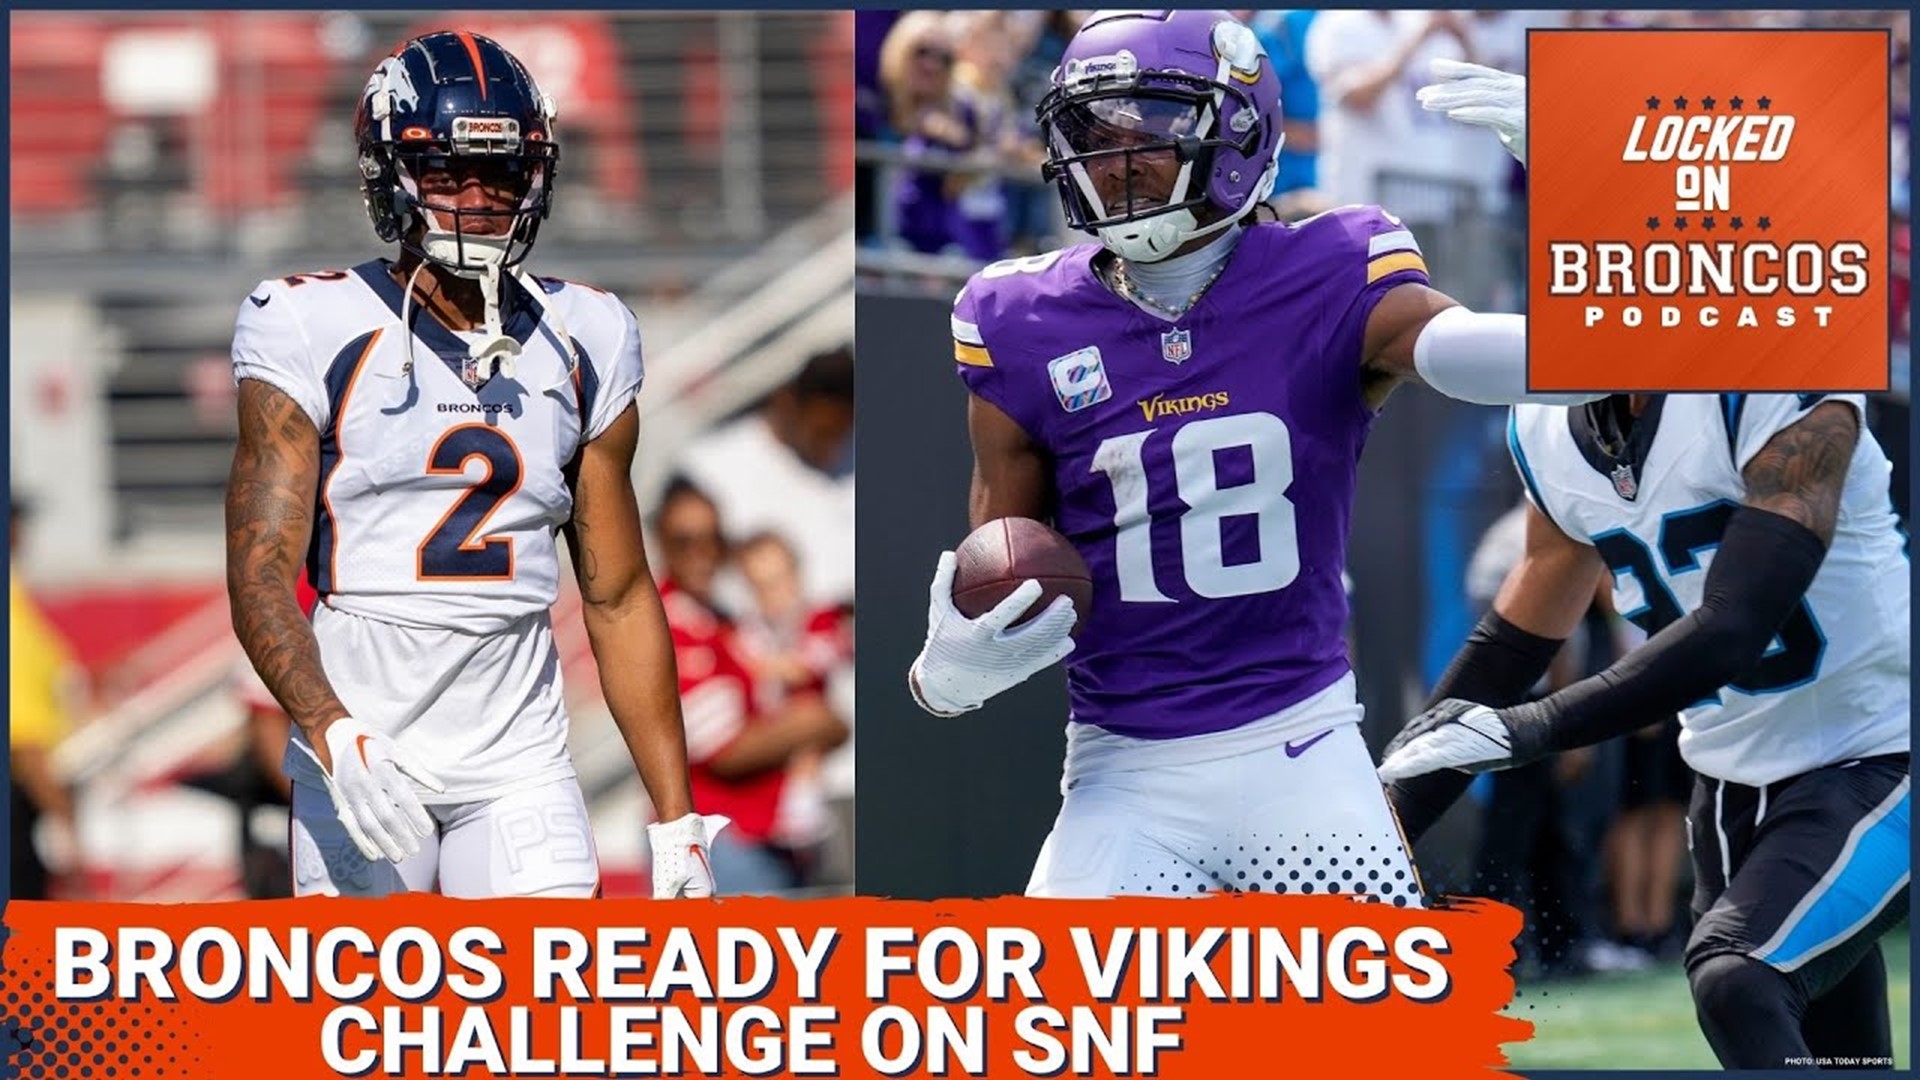 The Denver Broncos are back on primetime this Sunday as they take on the Minnesota Vikings on Sunday Night Football.